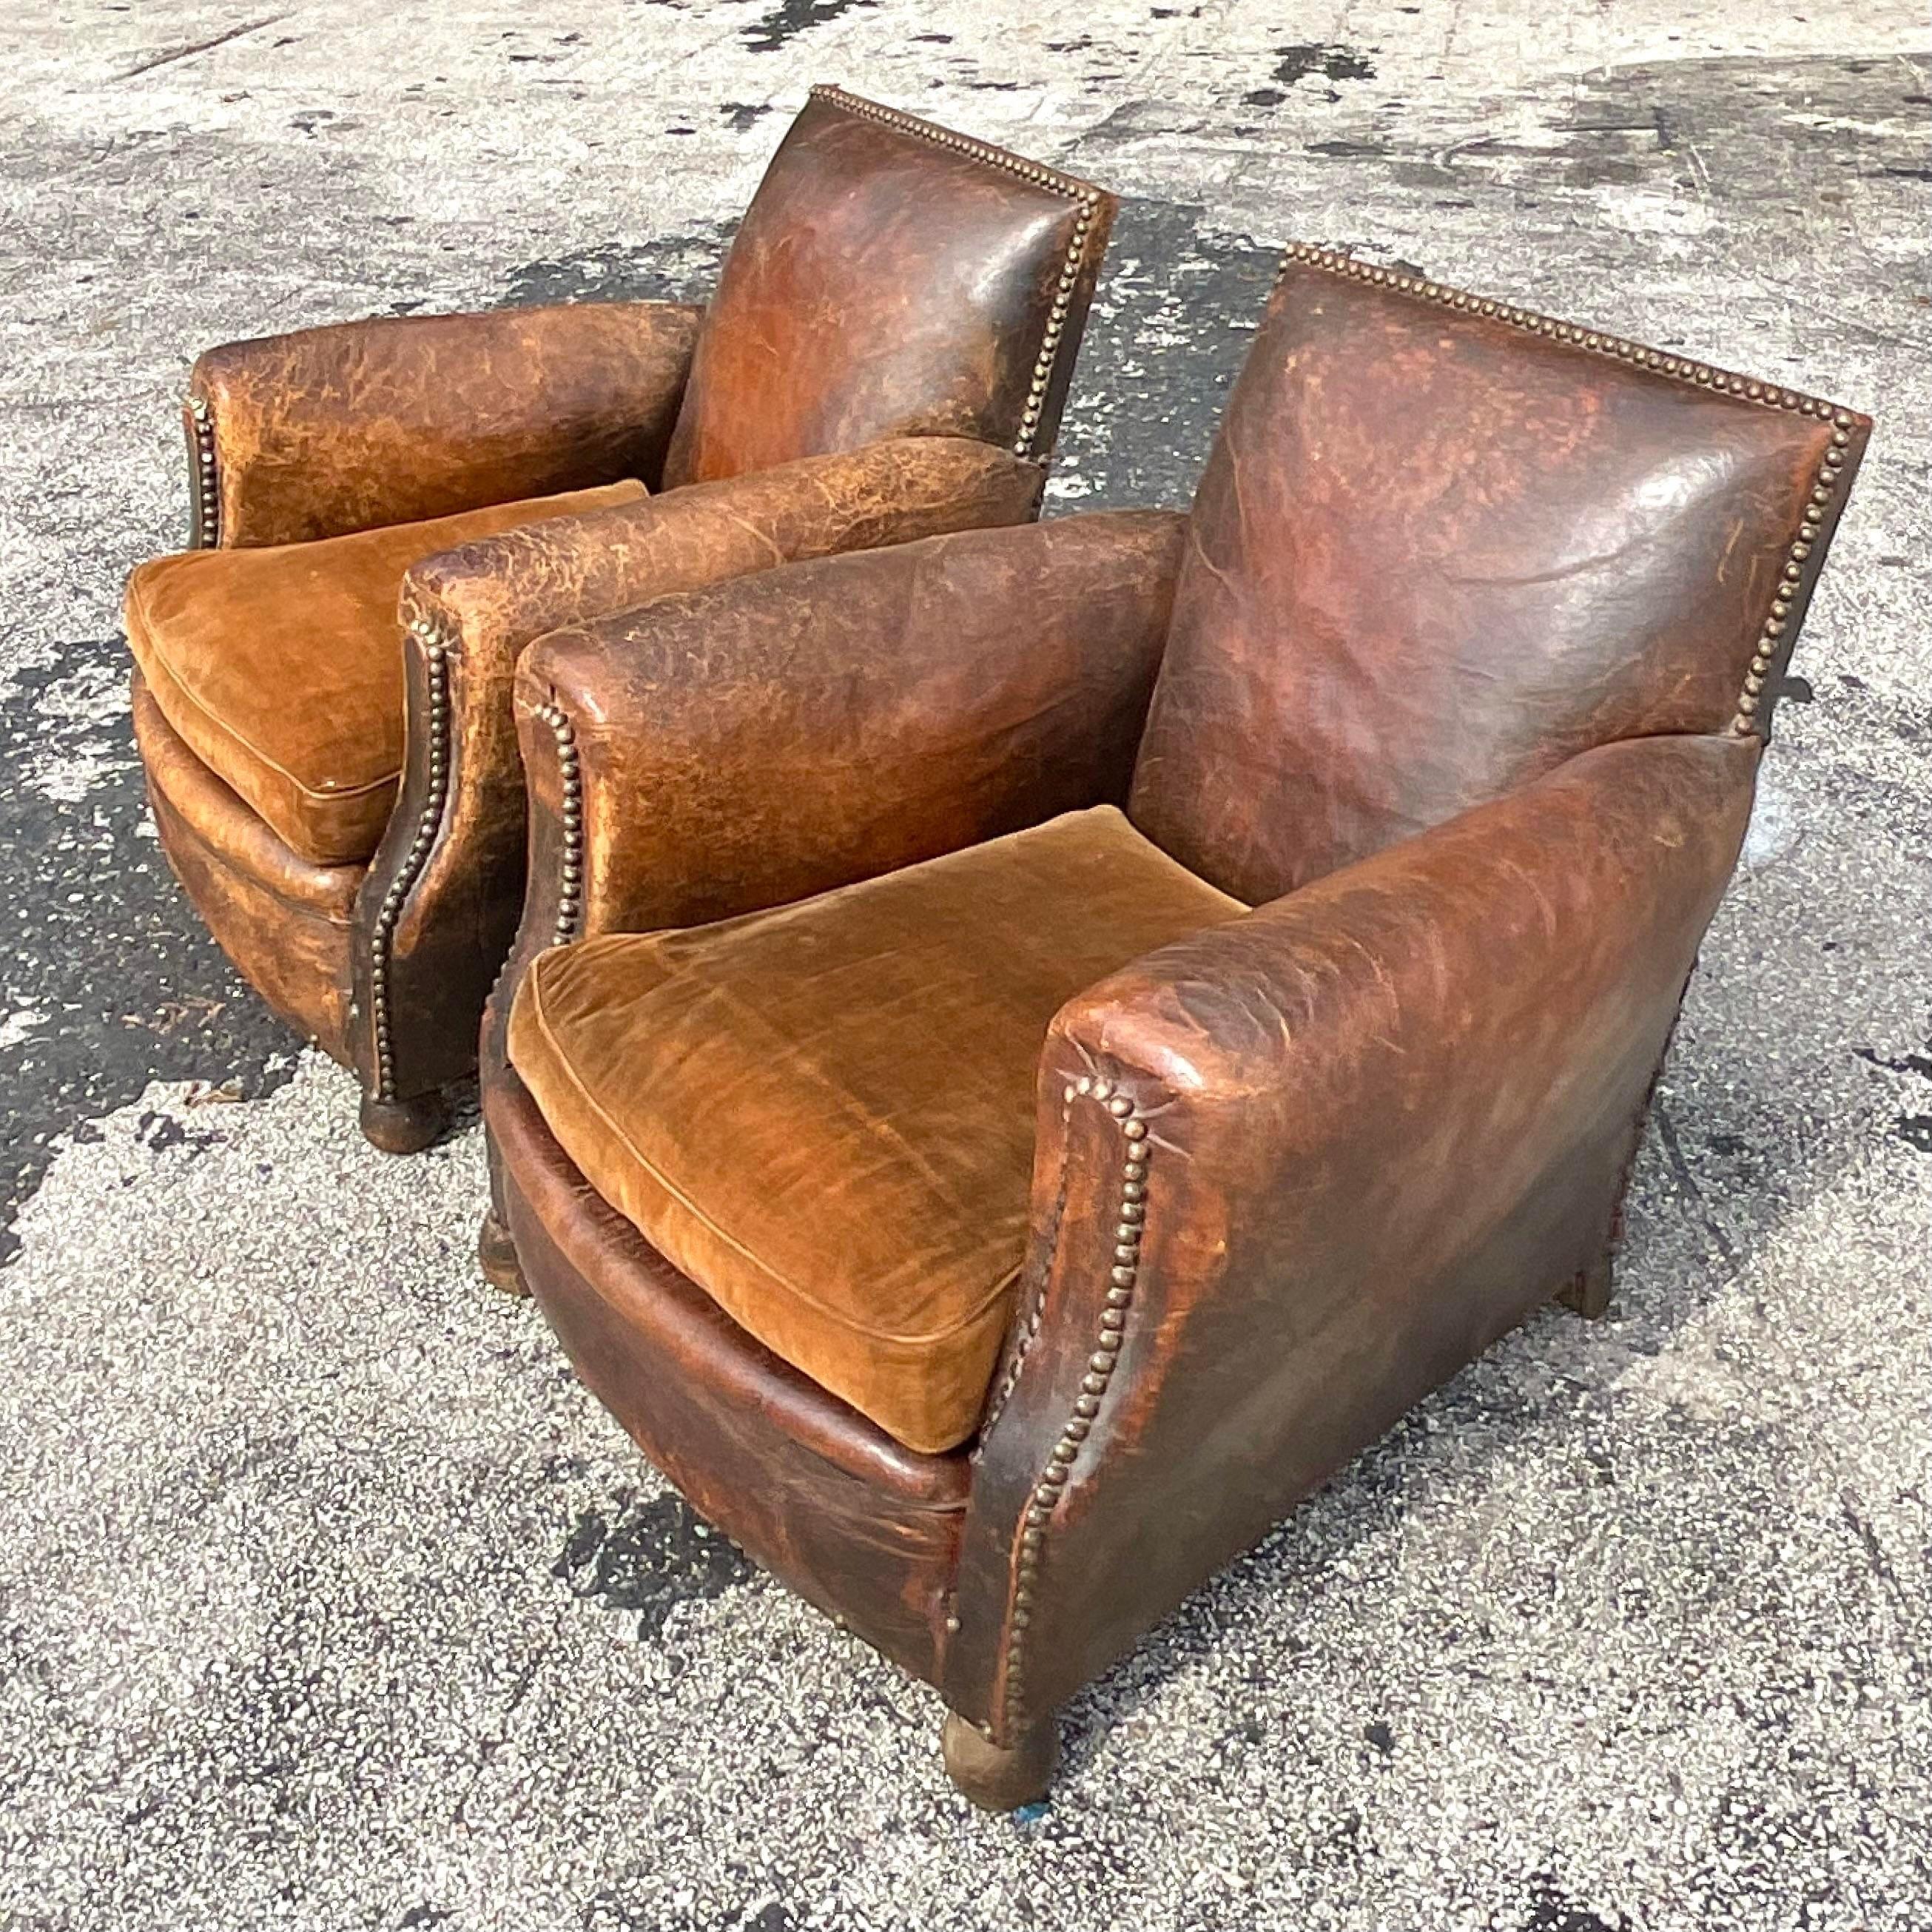 Vintage Boho Distressed French Art Deco Leather Club Chairs - a Pair For Sale 9